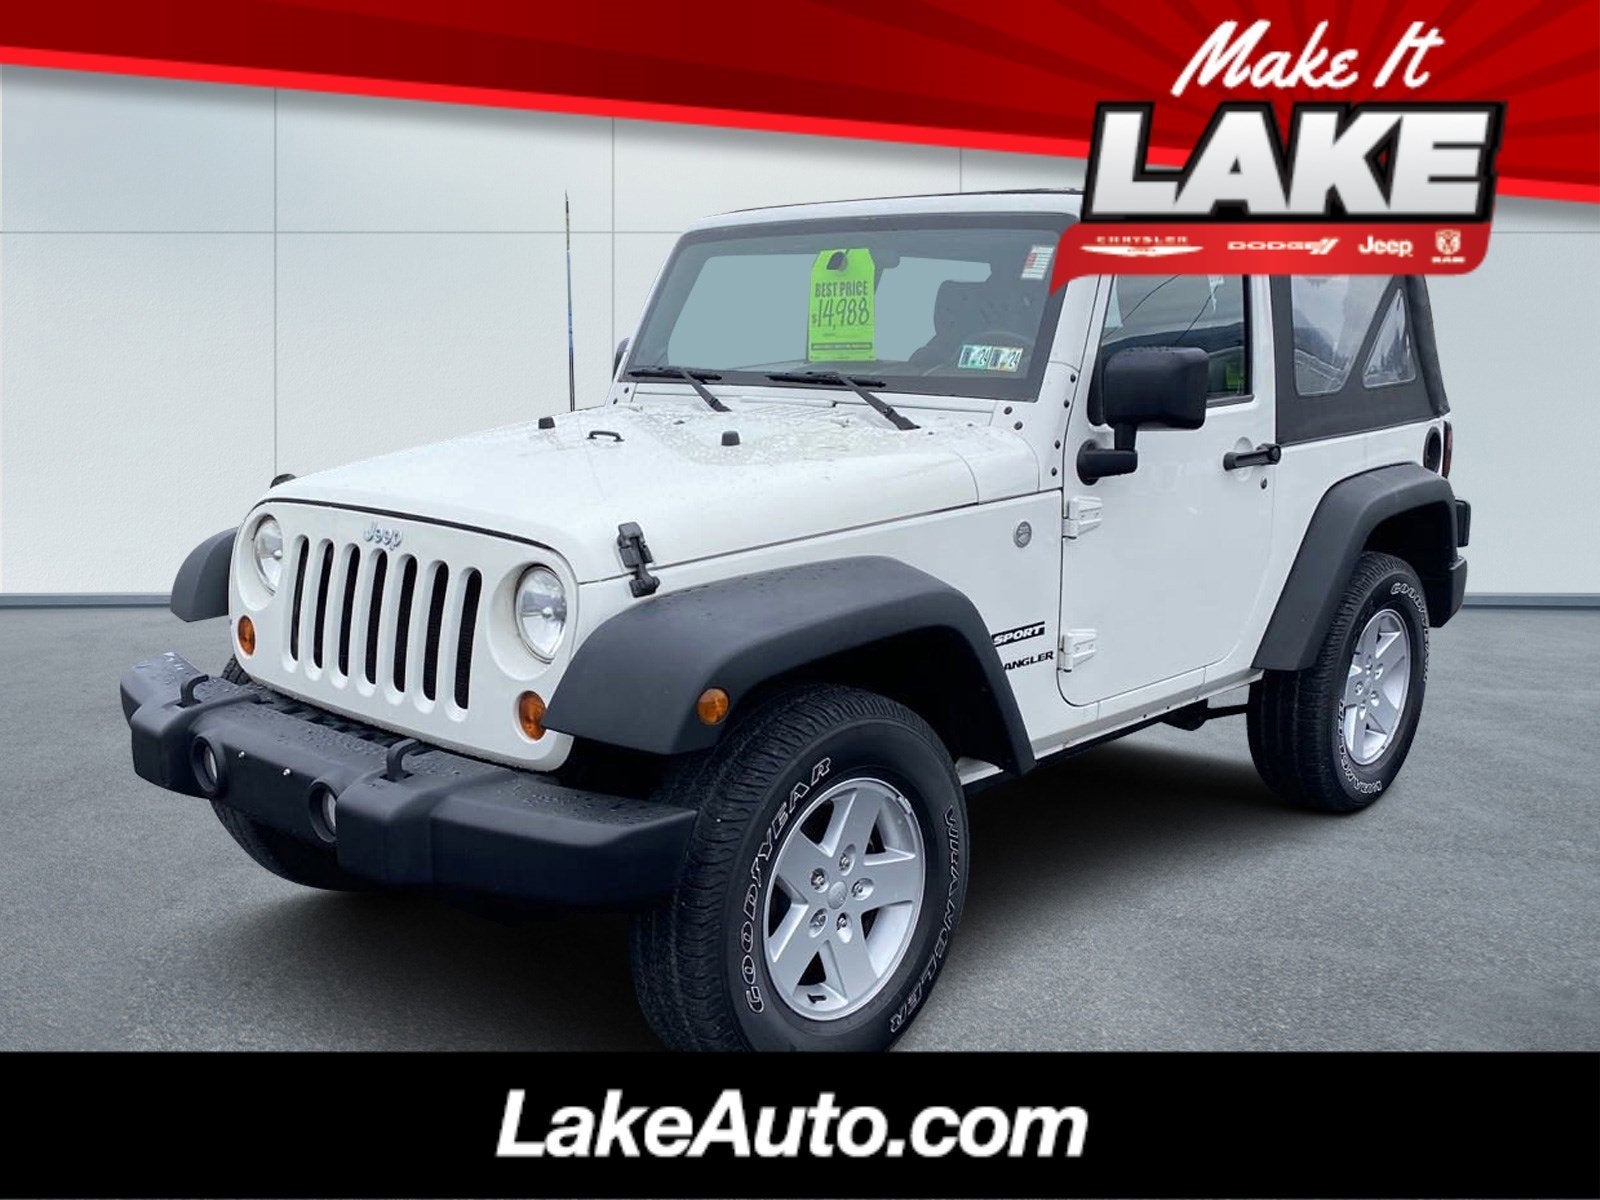 2010 Jeep Wrangler SPORT in Lewistown, PA | State College Jeep Wrangler |  Lake Chrysler Dodge Jeep Ram